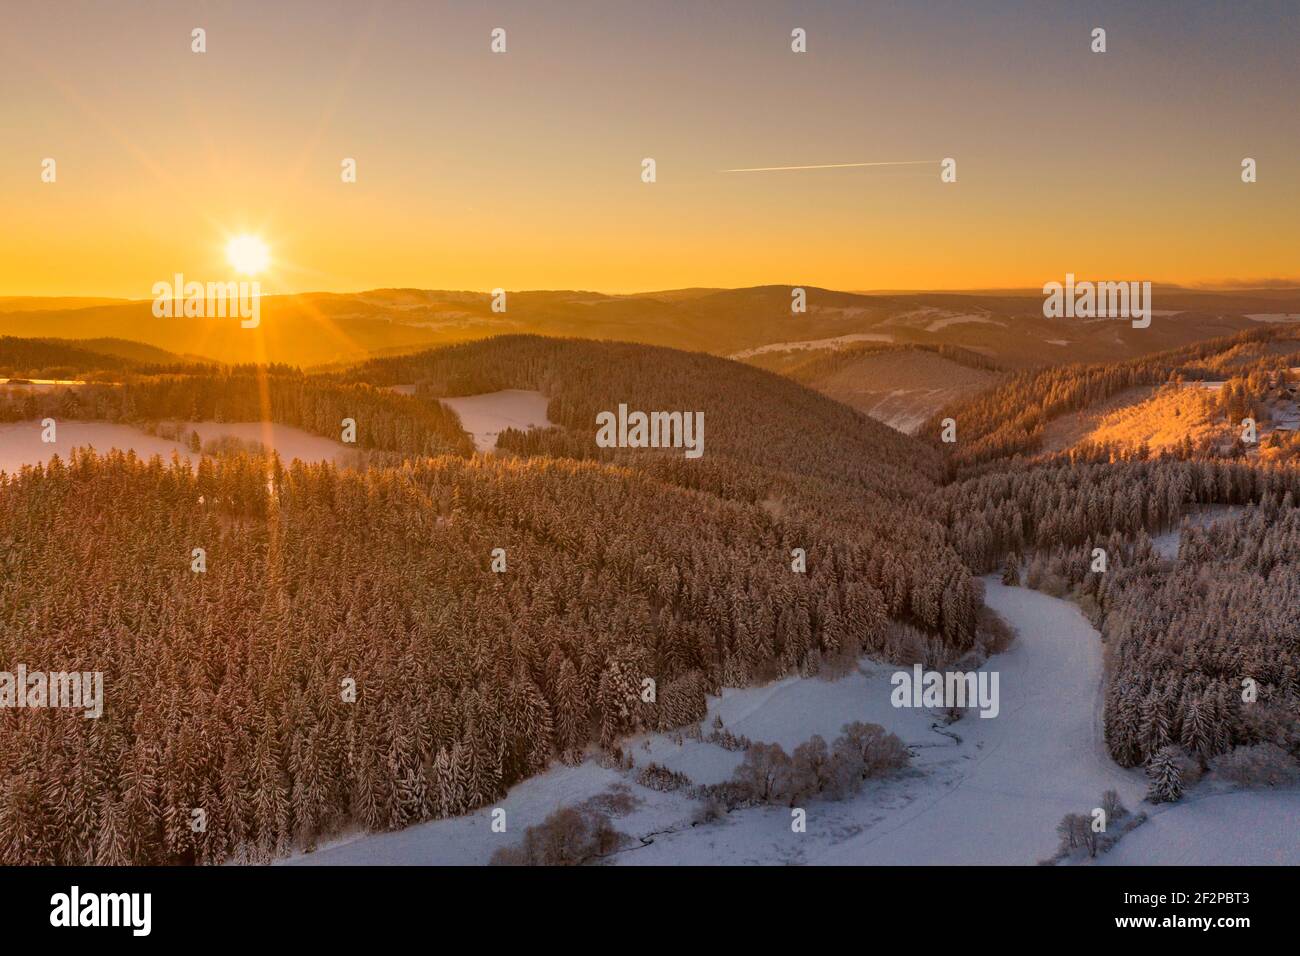 Germany, Thuringia, Grossbreitenbach, Allersdorf, forest, valley, mountains, brook, snow, sunrise, back light, aerial view Stock Photo